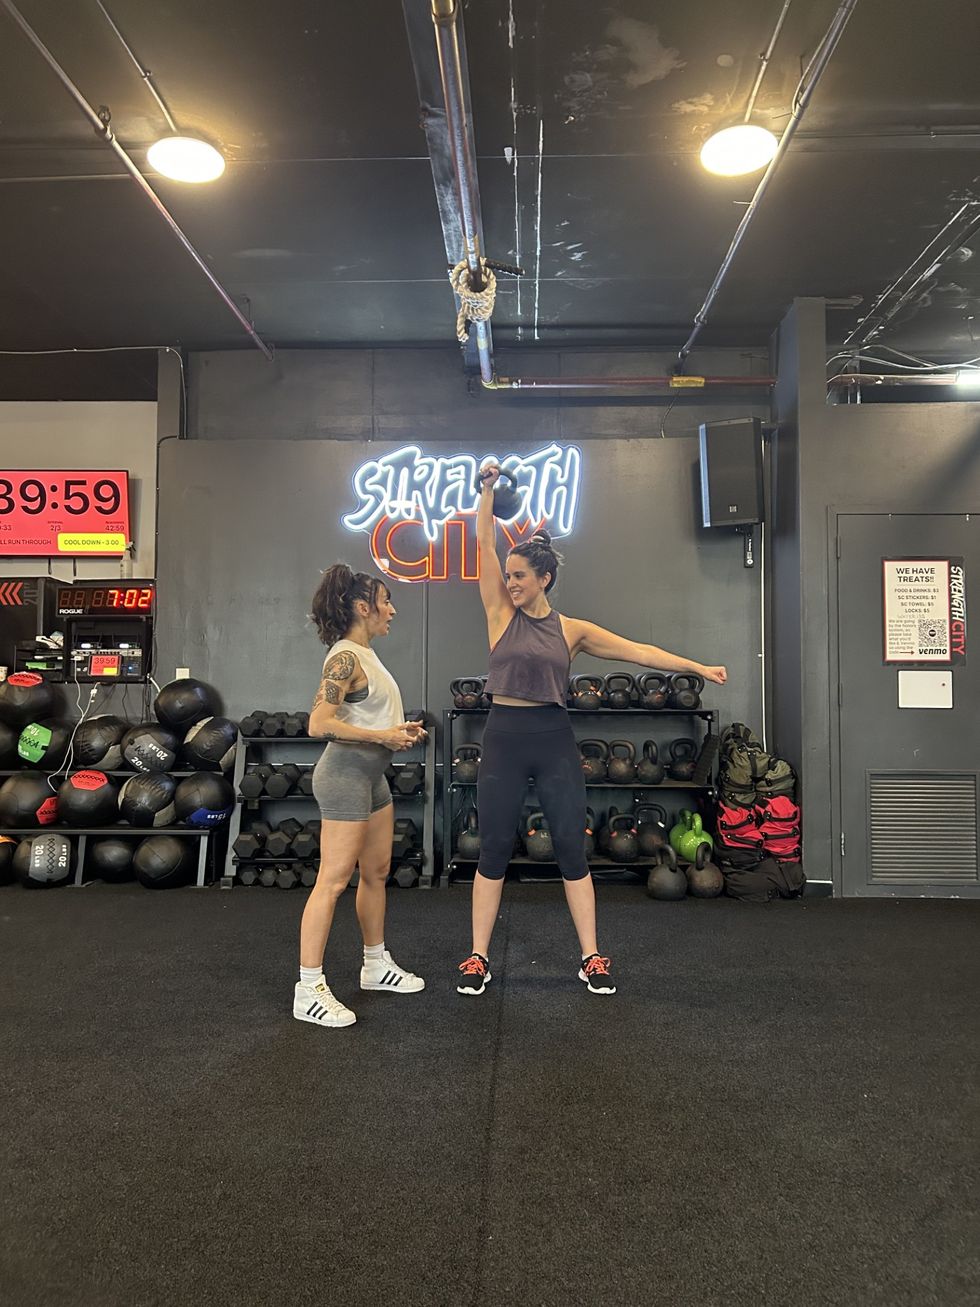 jordyn holds a kettlebell in the air while her trainer, alex, gives her pointers